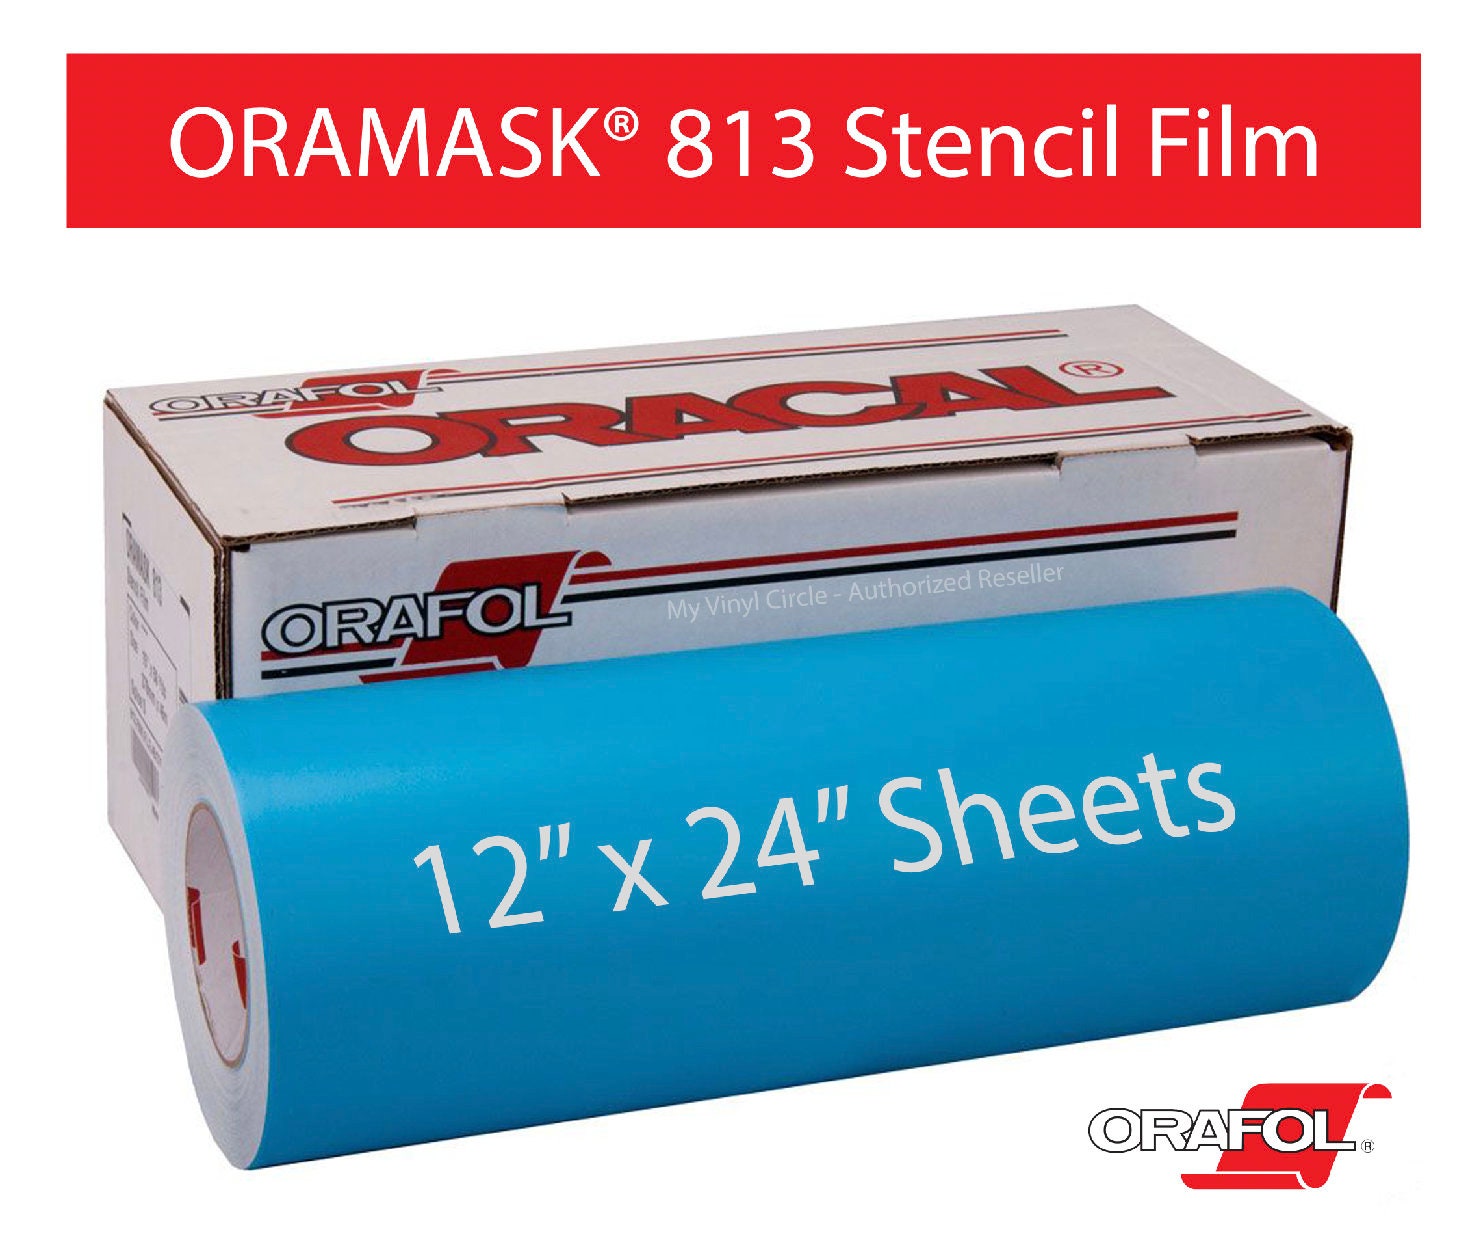 Stencil Film 12x20 Ft Roll - Oracal ORAMASK 813 for Crisp Paint Lines